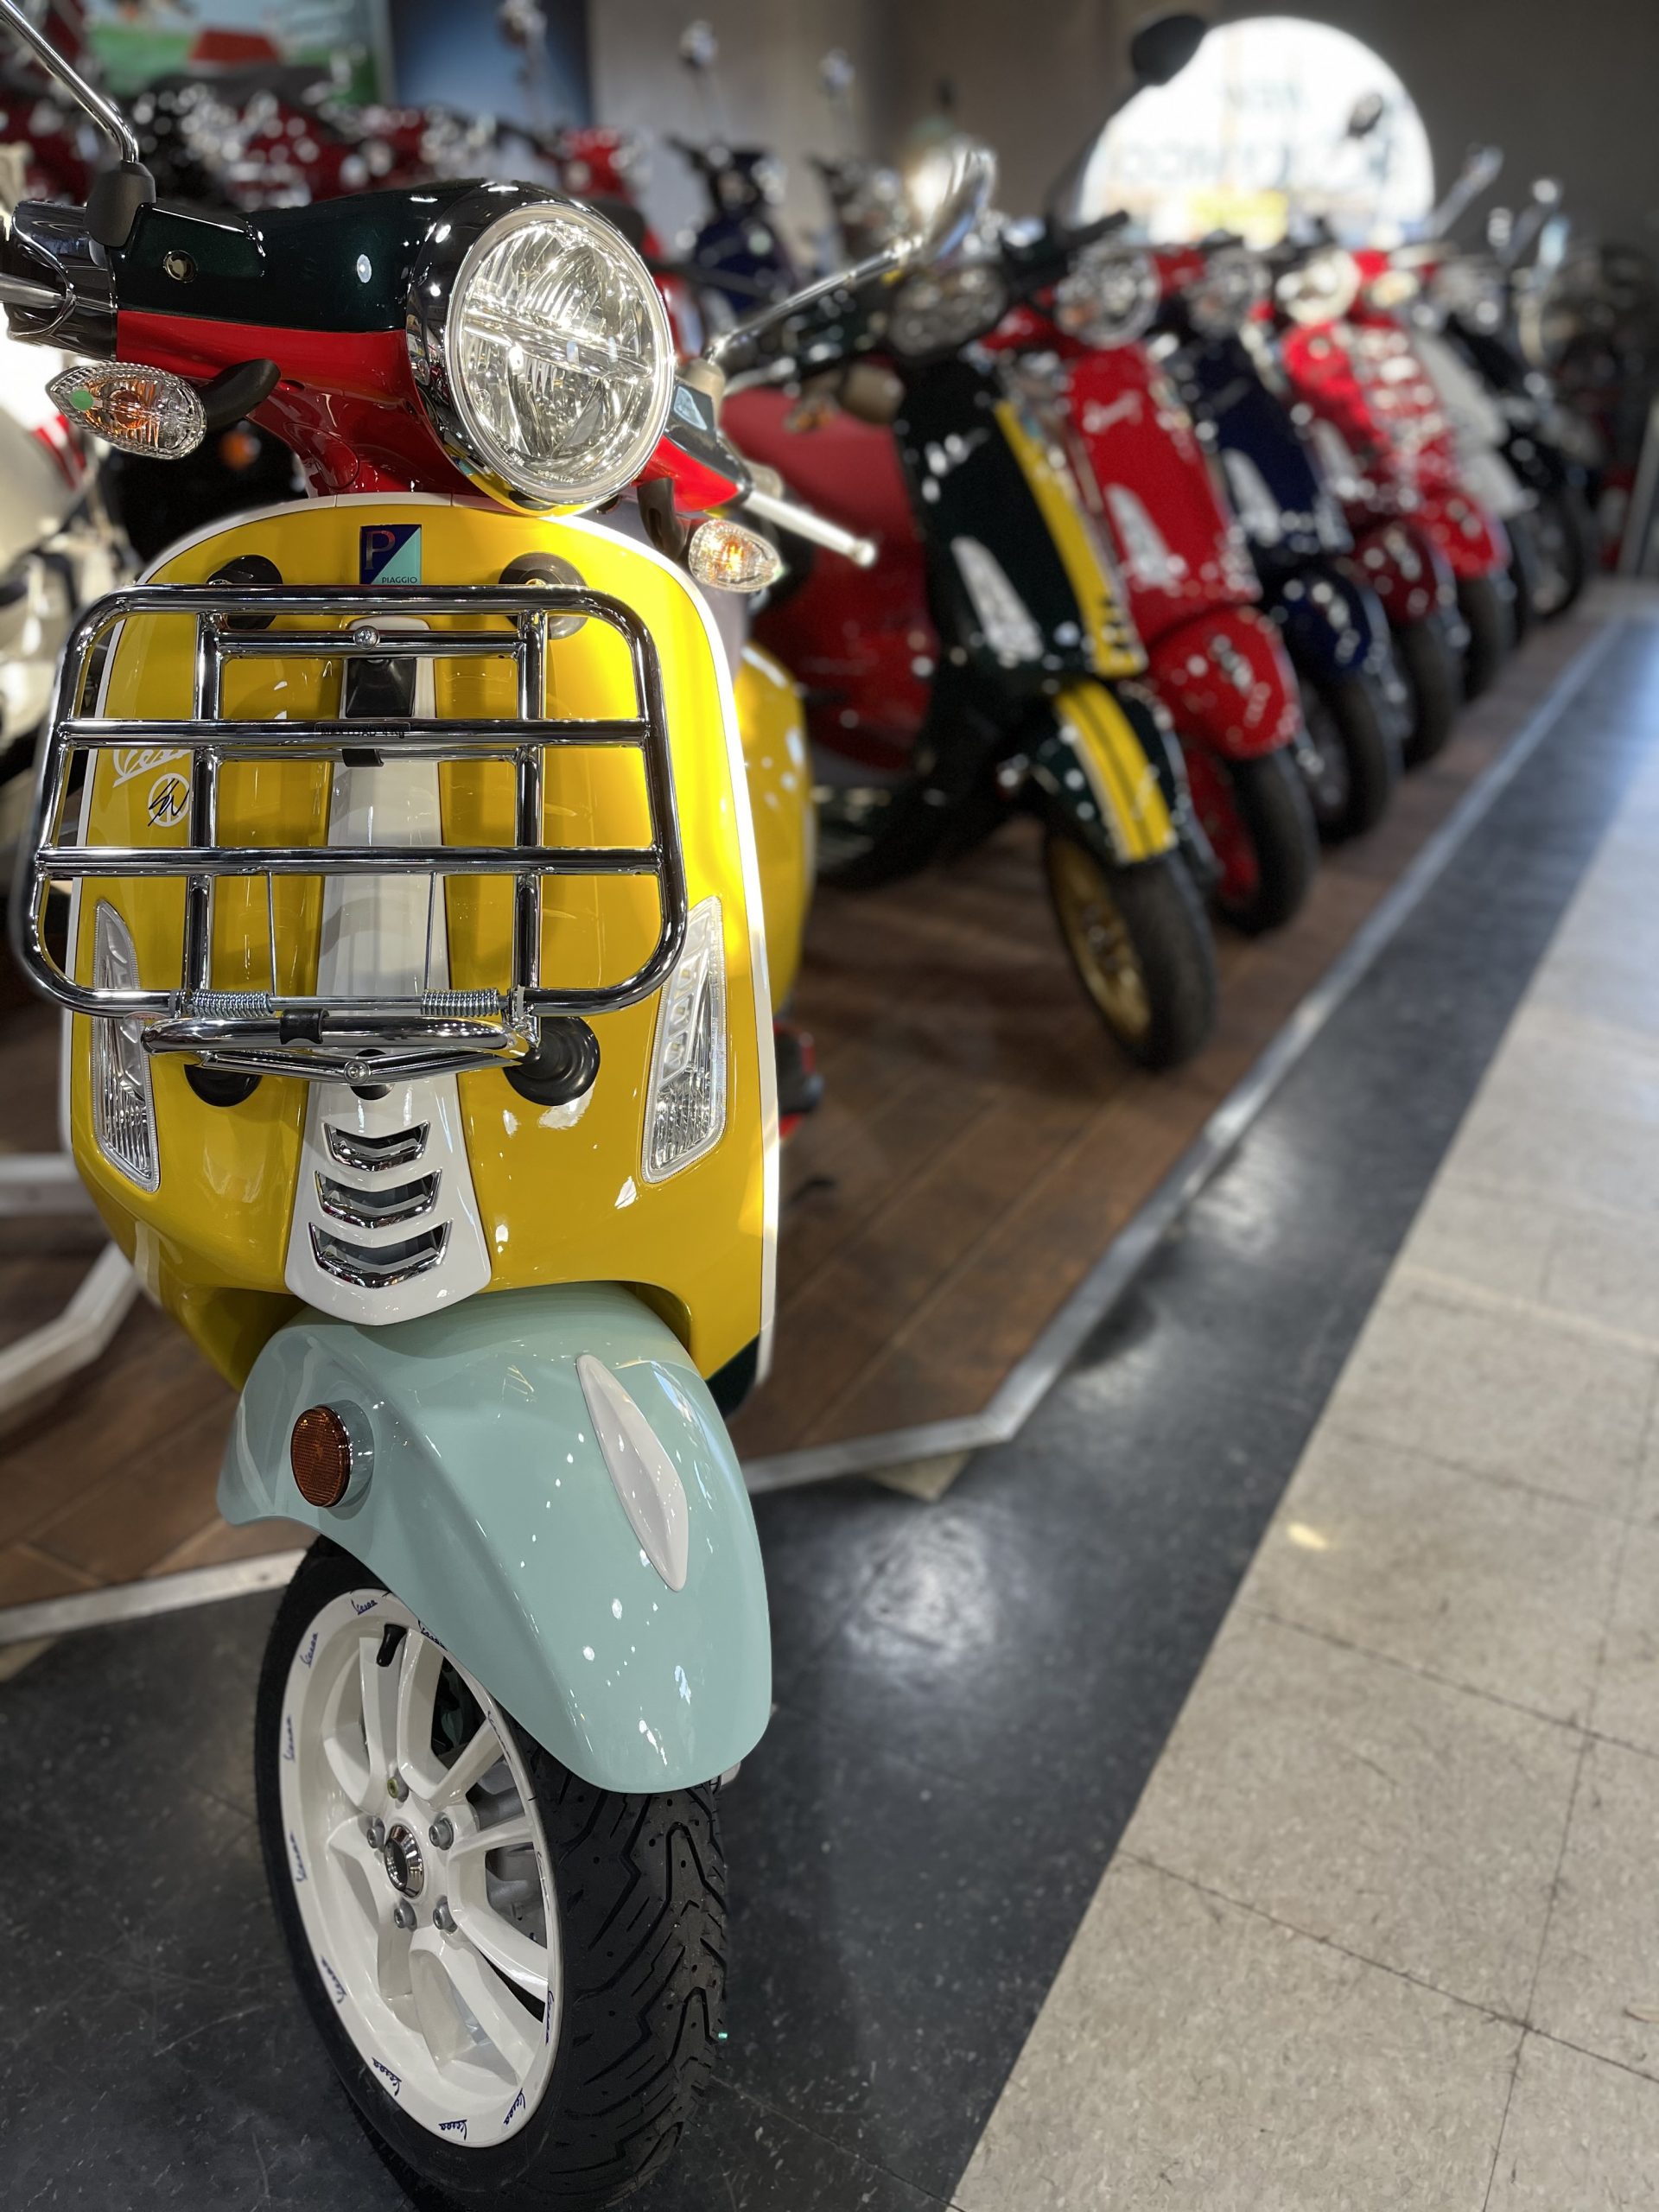 Current Vespa Inventory – The Motorcycle Shop